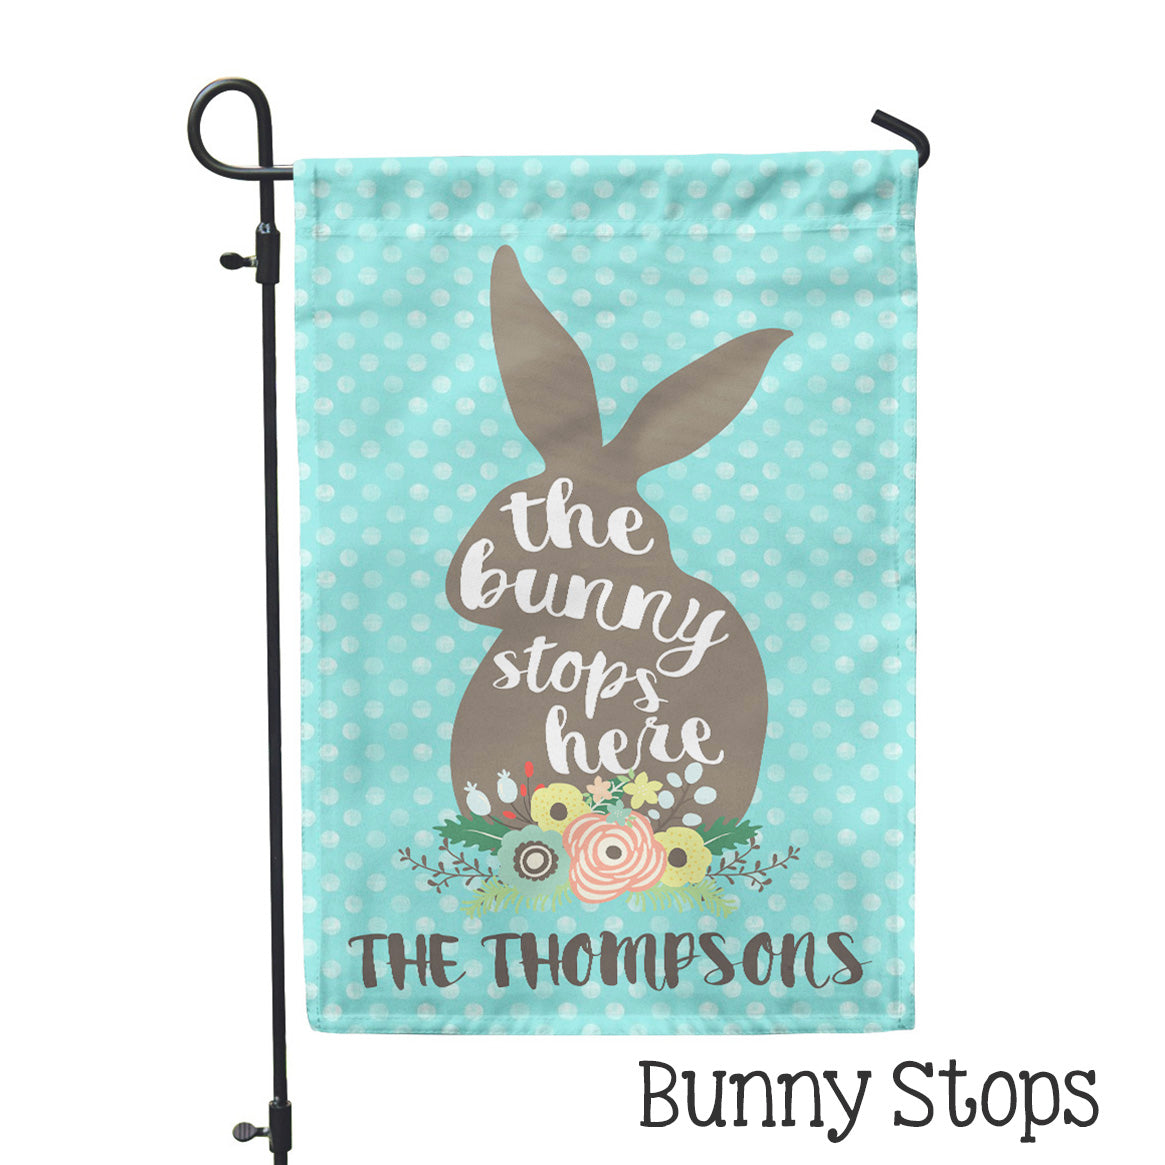 Personalized Garden Flag - Bunny Stops Custom Flag - 12" x 18" - Second East